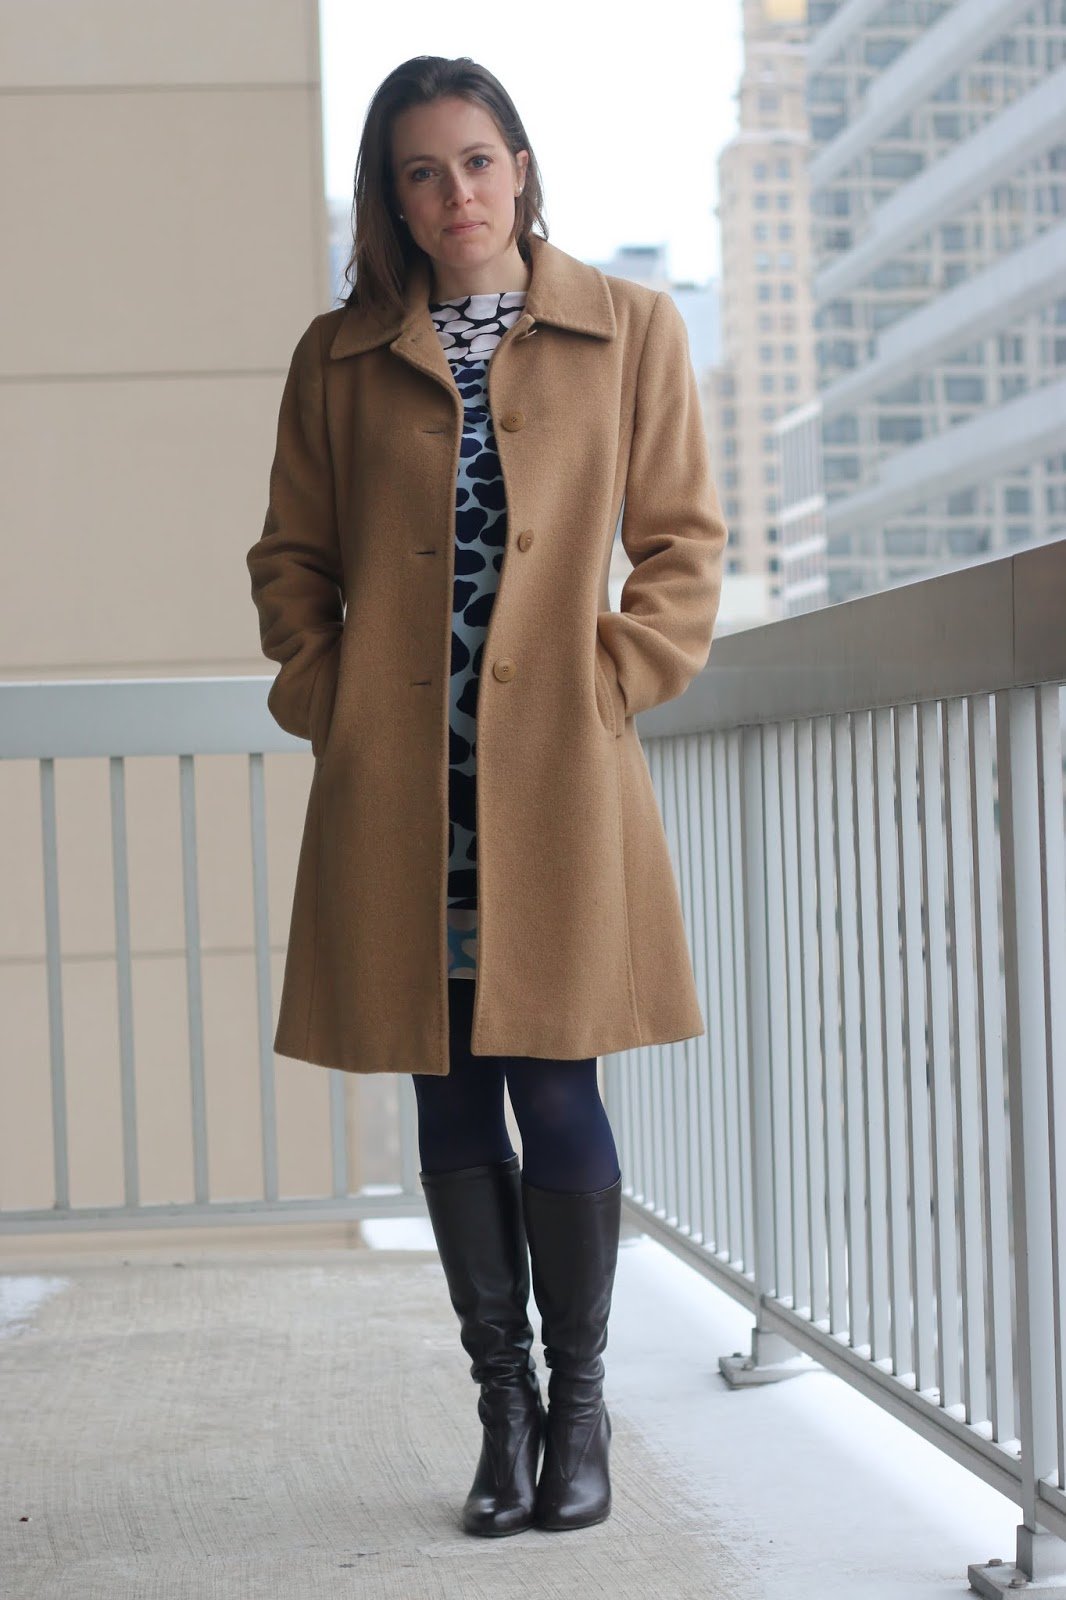 FashionablyEmployed.com | Thrifted giraffe print DVF dress, thrifted camel hair coat, navy tights and brown boots, expert thrifting tips from seasoned thrifters, wear to work office style